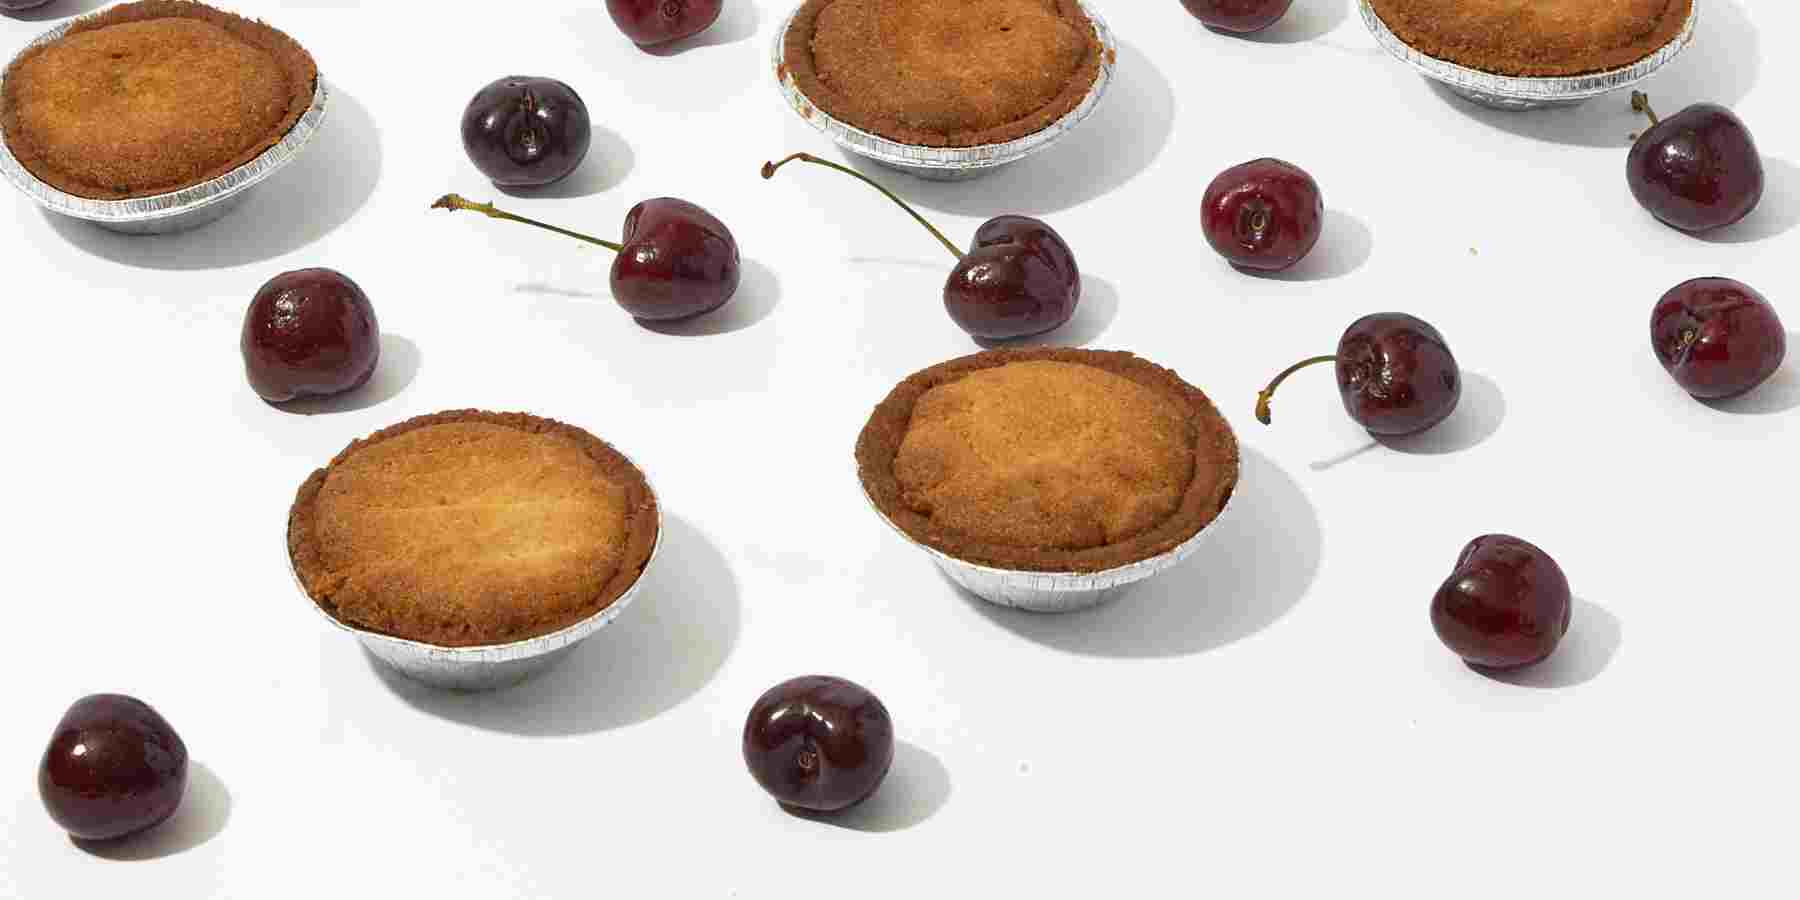 A group of cherry pies on a white surface.